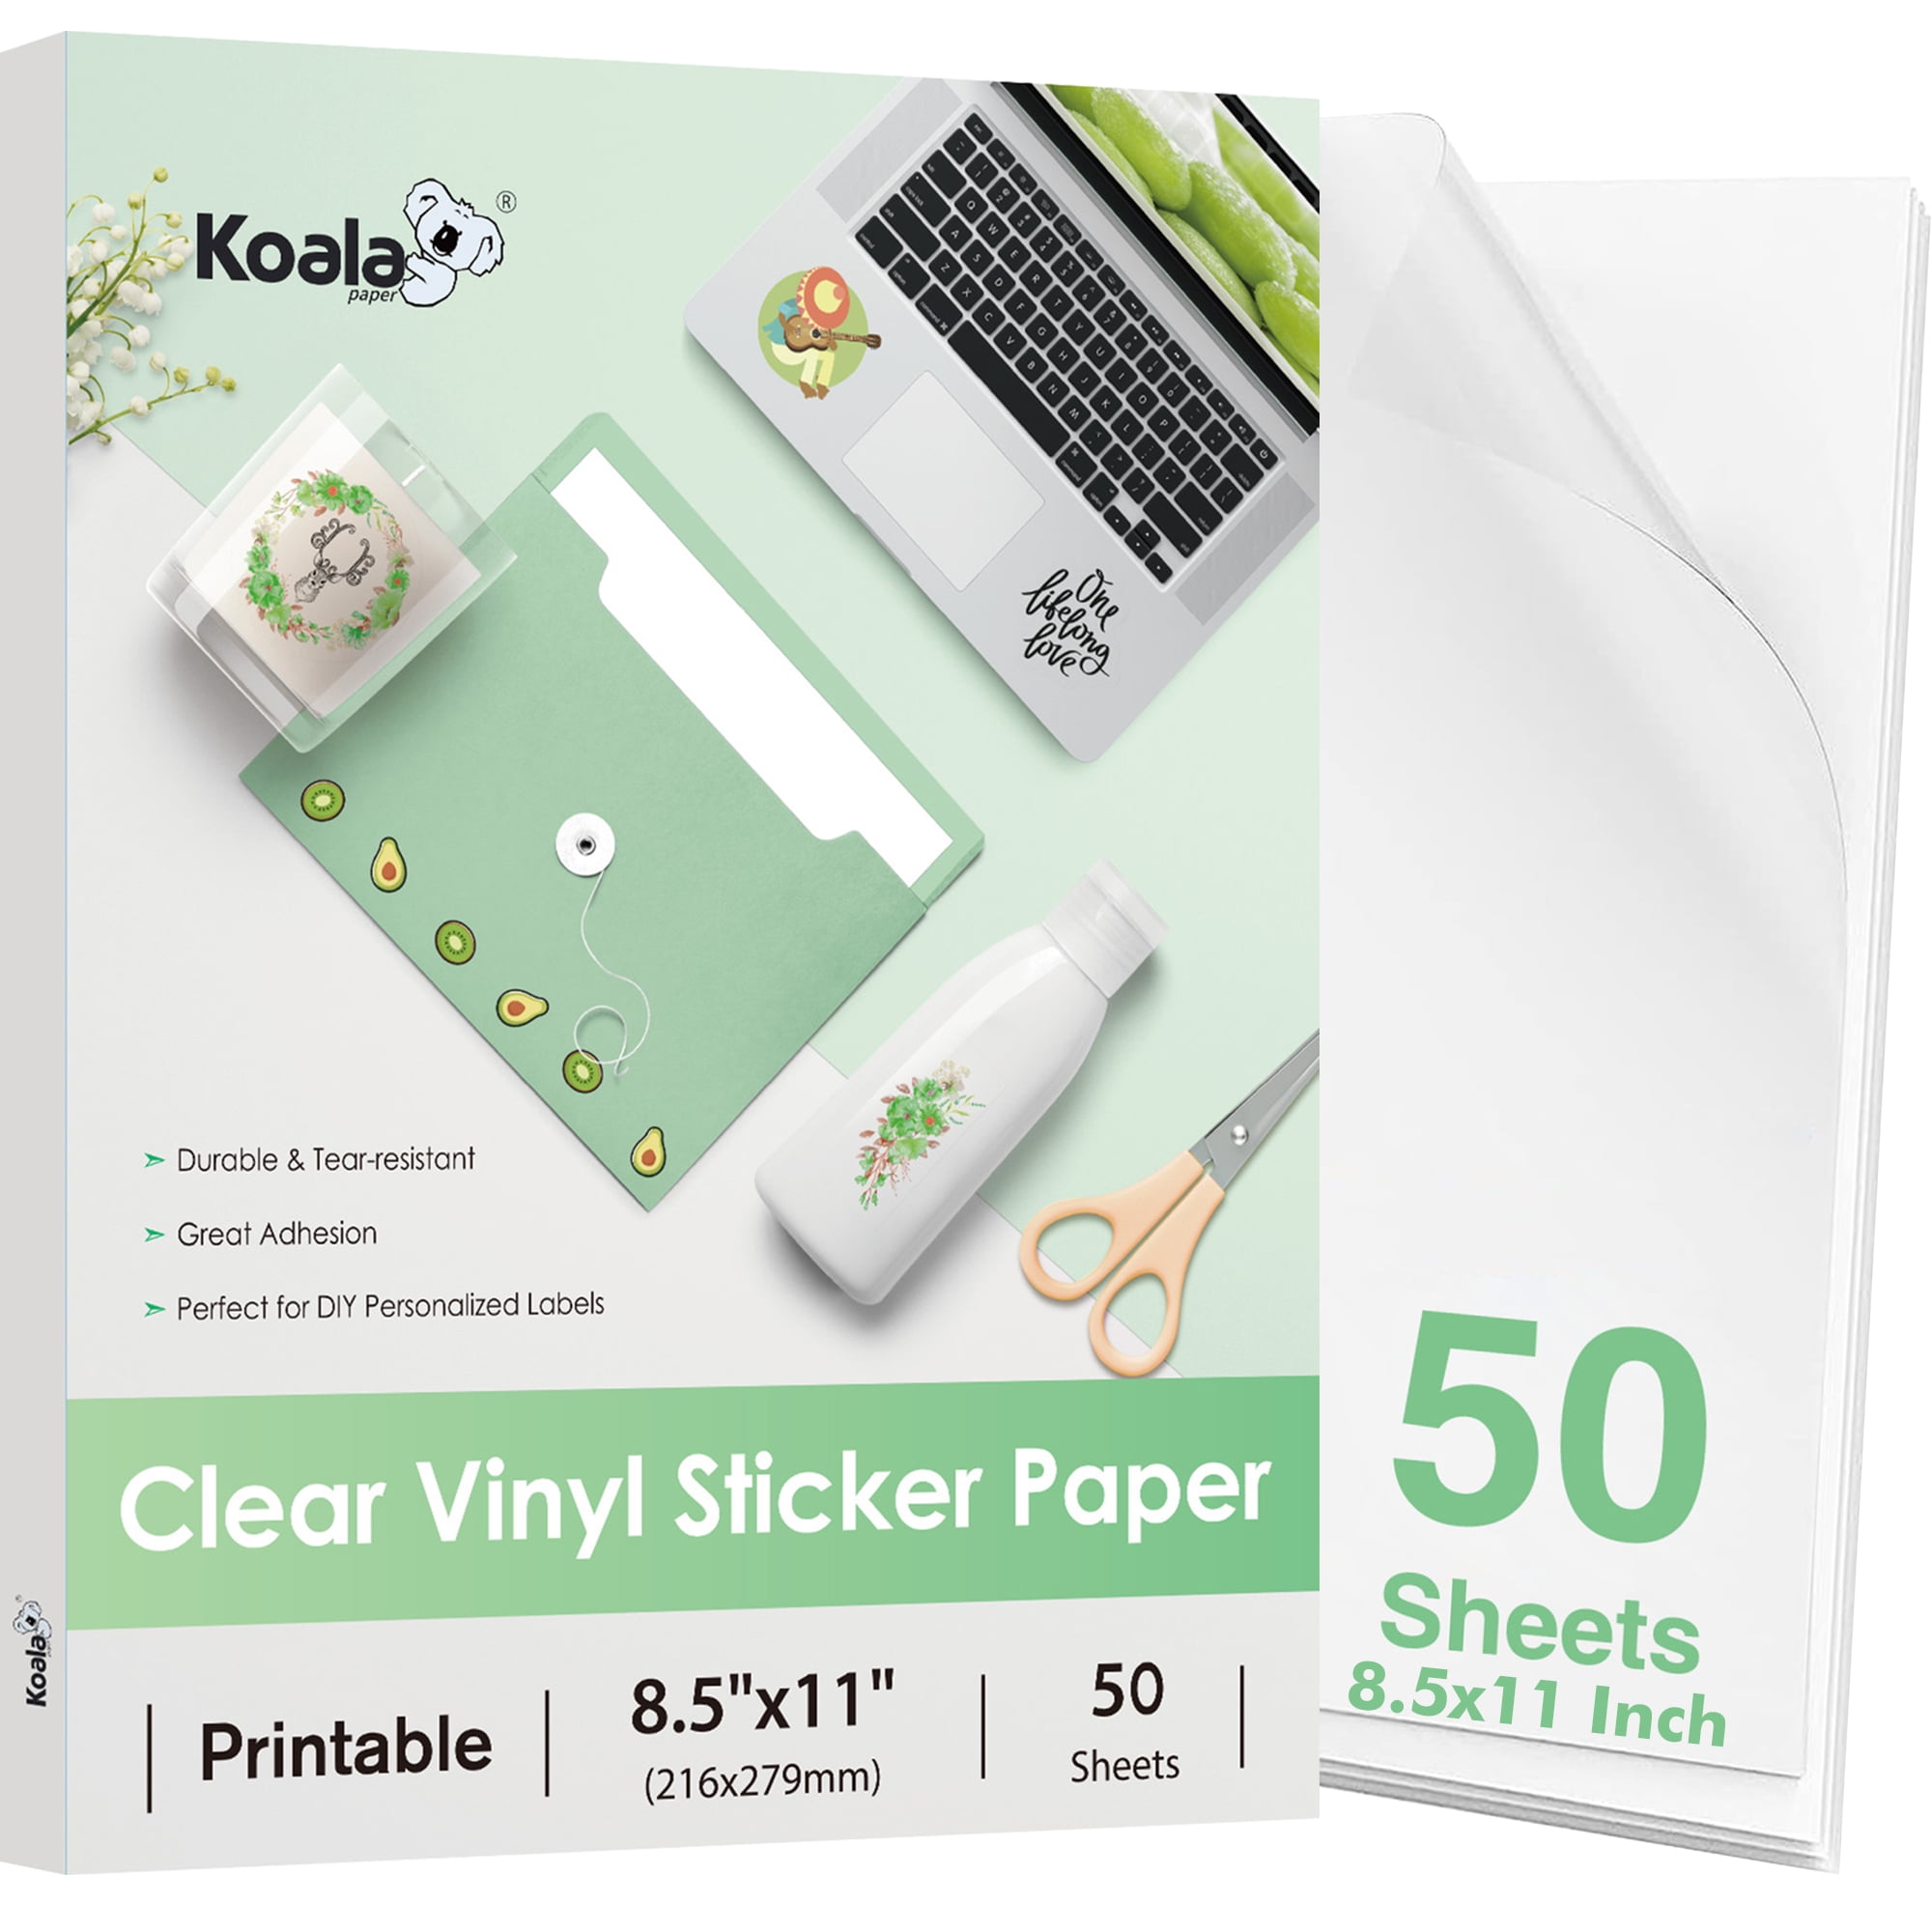 Koala Clear Sticker Paper for Inkjet Printer - Waterproof Clear Printable  Vinyl Sticker Paper 8.5x11 Inch 50 Sheets Transparent Glossy Sticker Paper  for DIY Personalized Stickers, Labels, Decals 